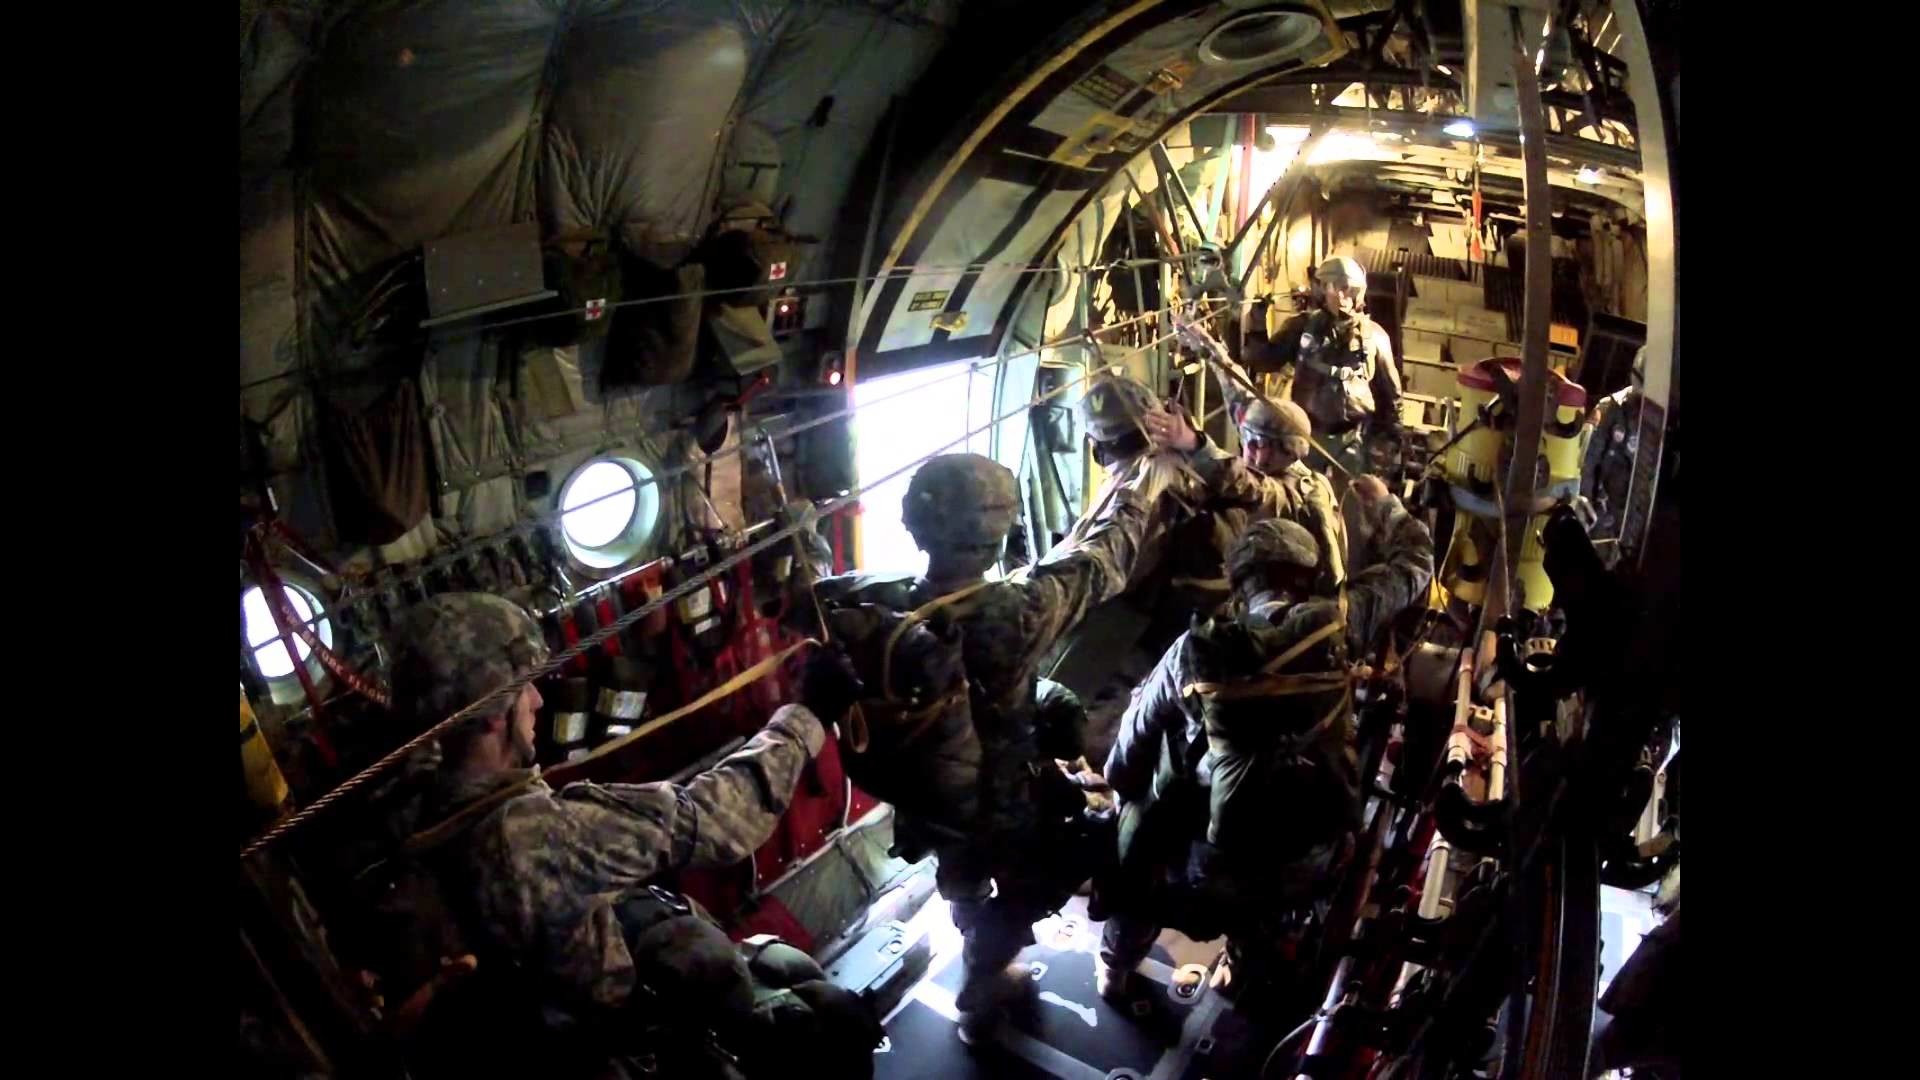 1920x1080 JOAX 2013 82ND AIRBORNE 1 BCT PERSONNEL AIRDROP in 1080 HIGH DEF - YouTube